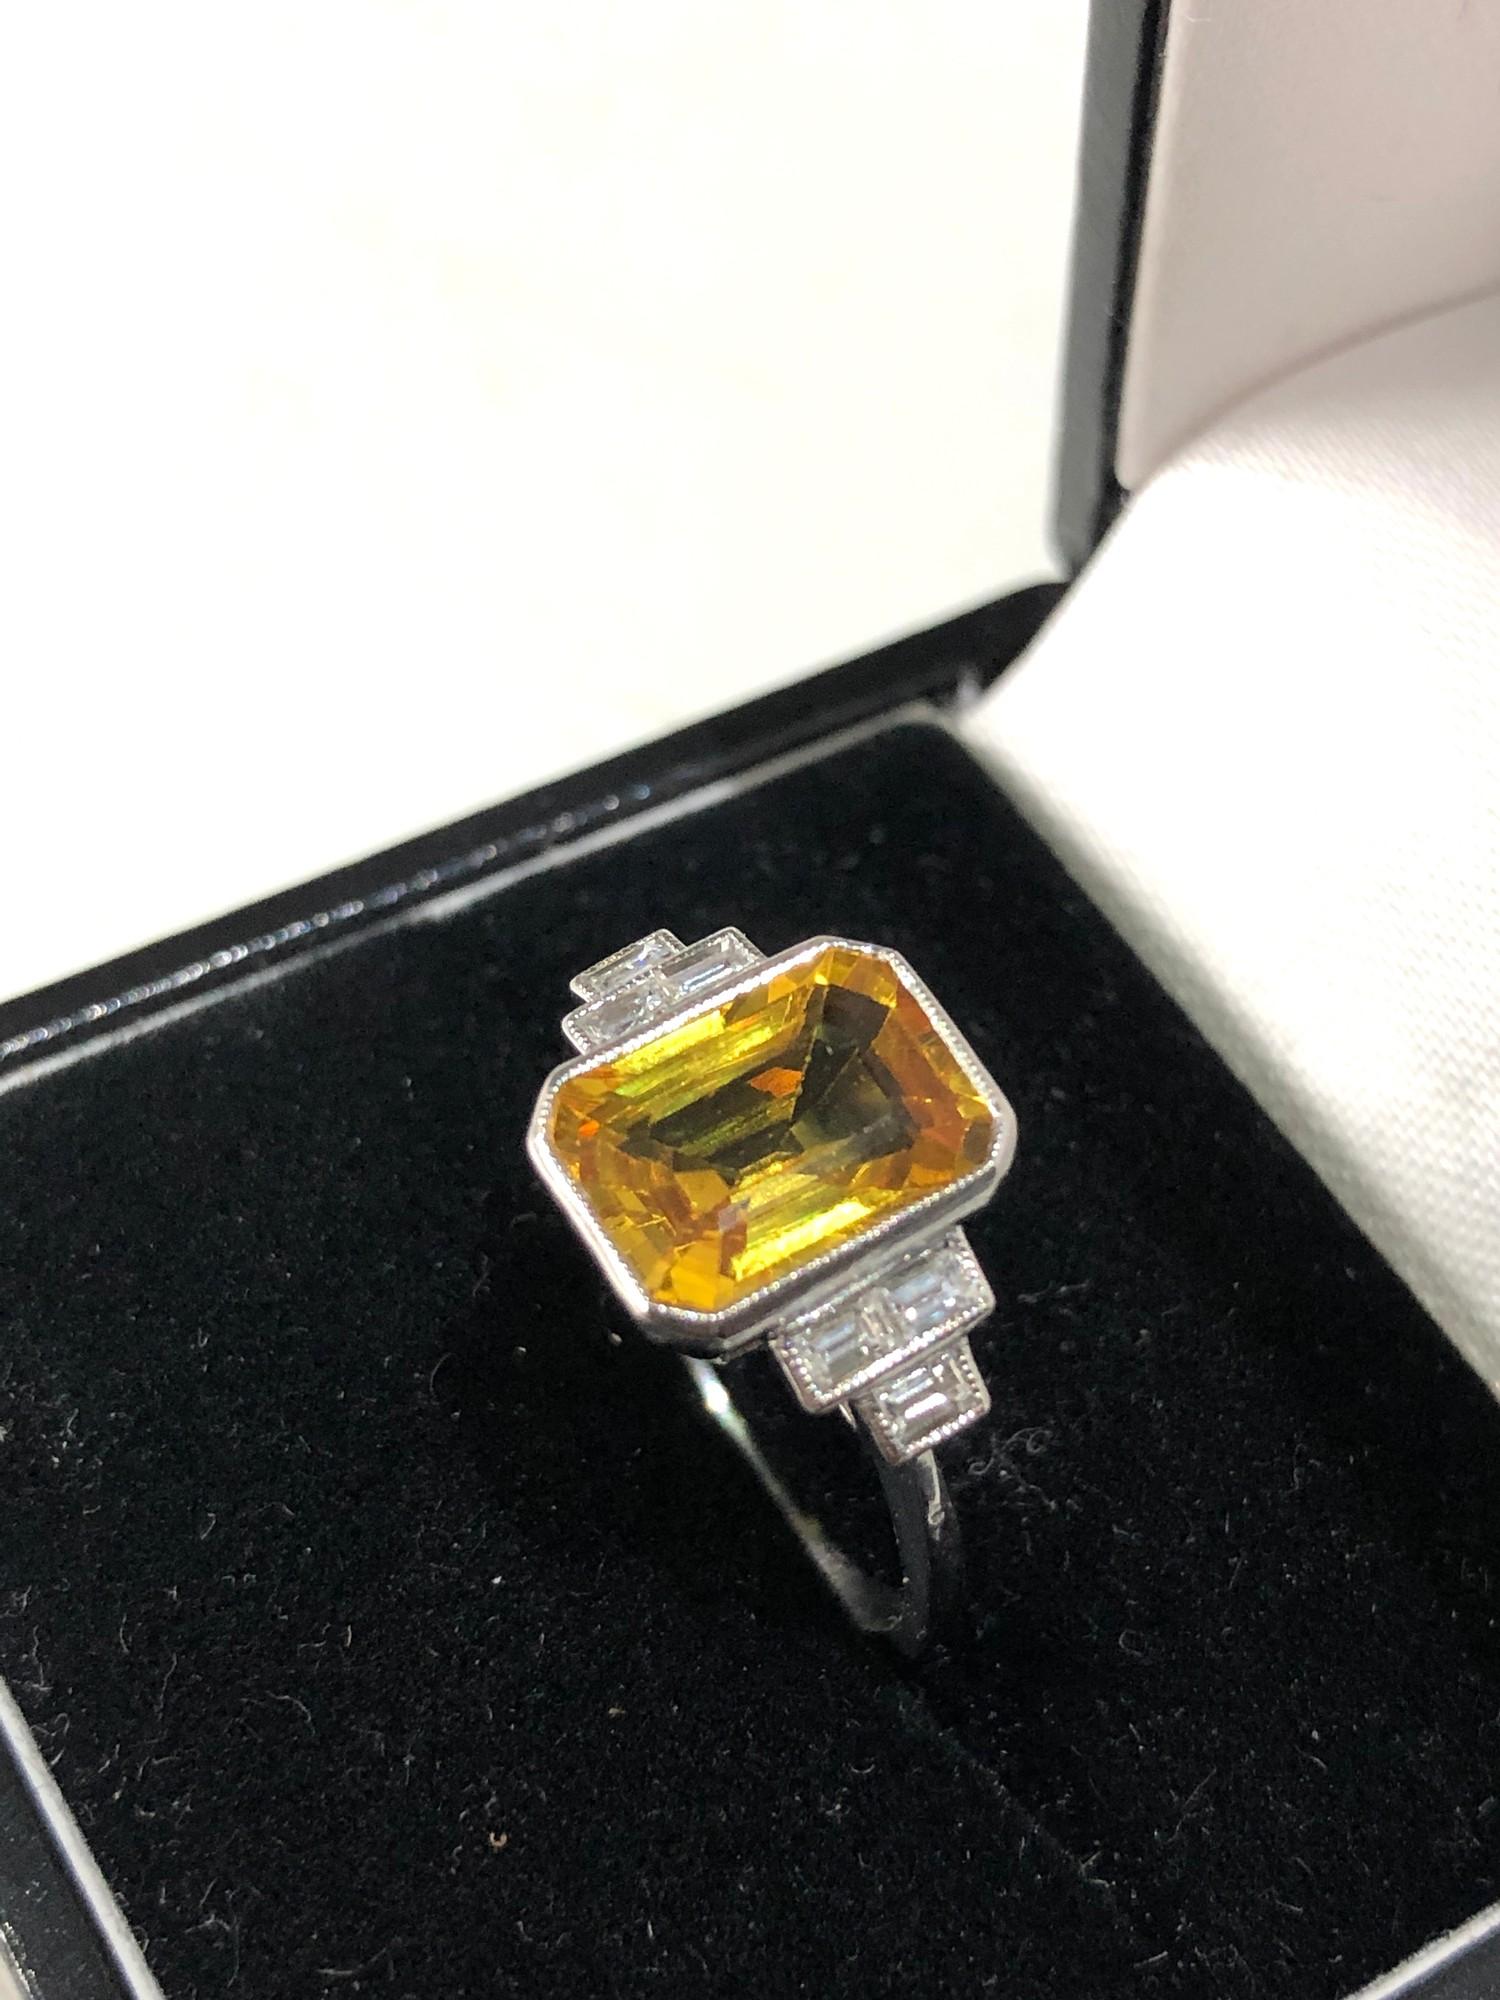 Fine platinum diamond and yellow sapphire ring central yellow sapphire measures approx 11mm by 7mm - Image 2 of 4